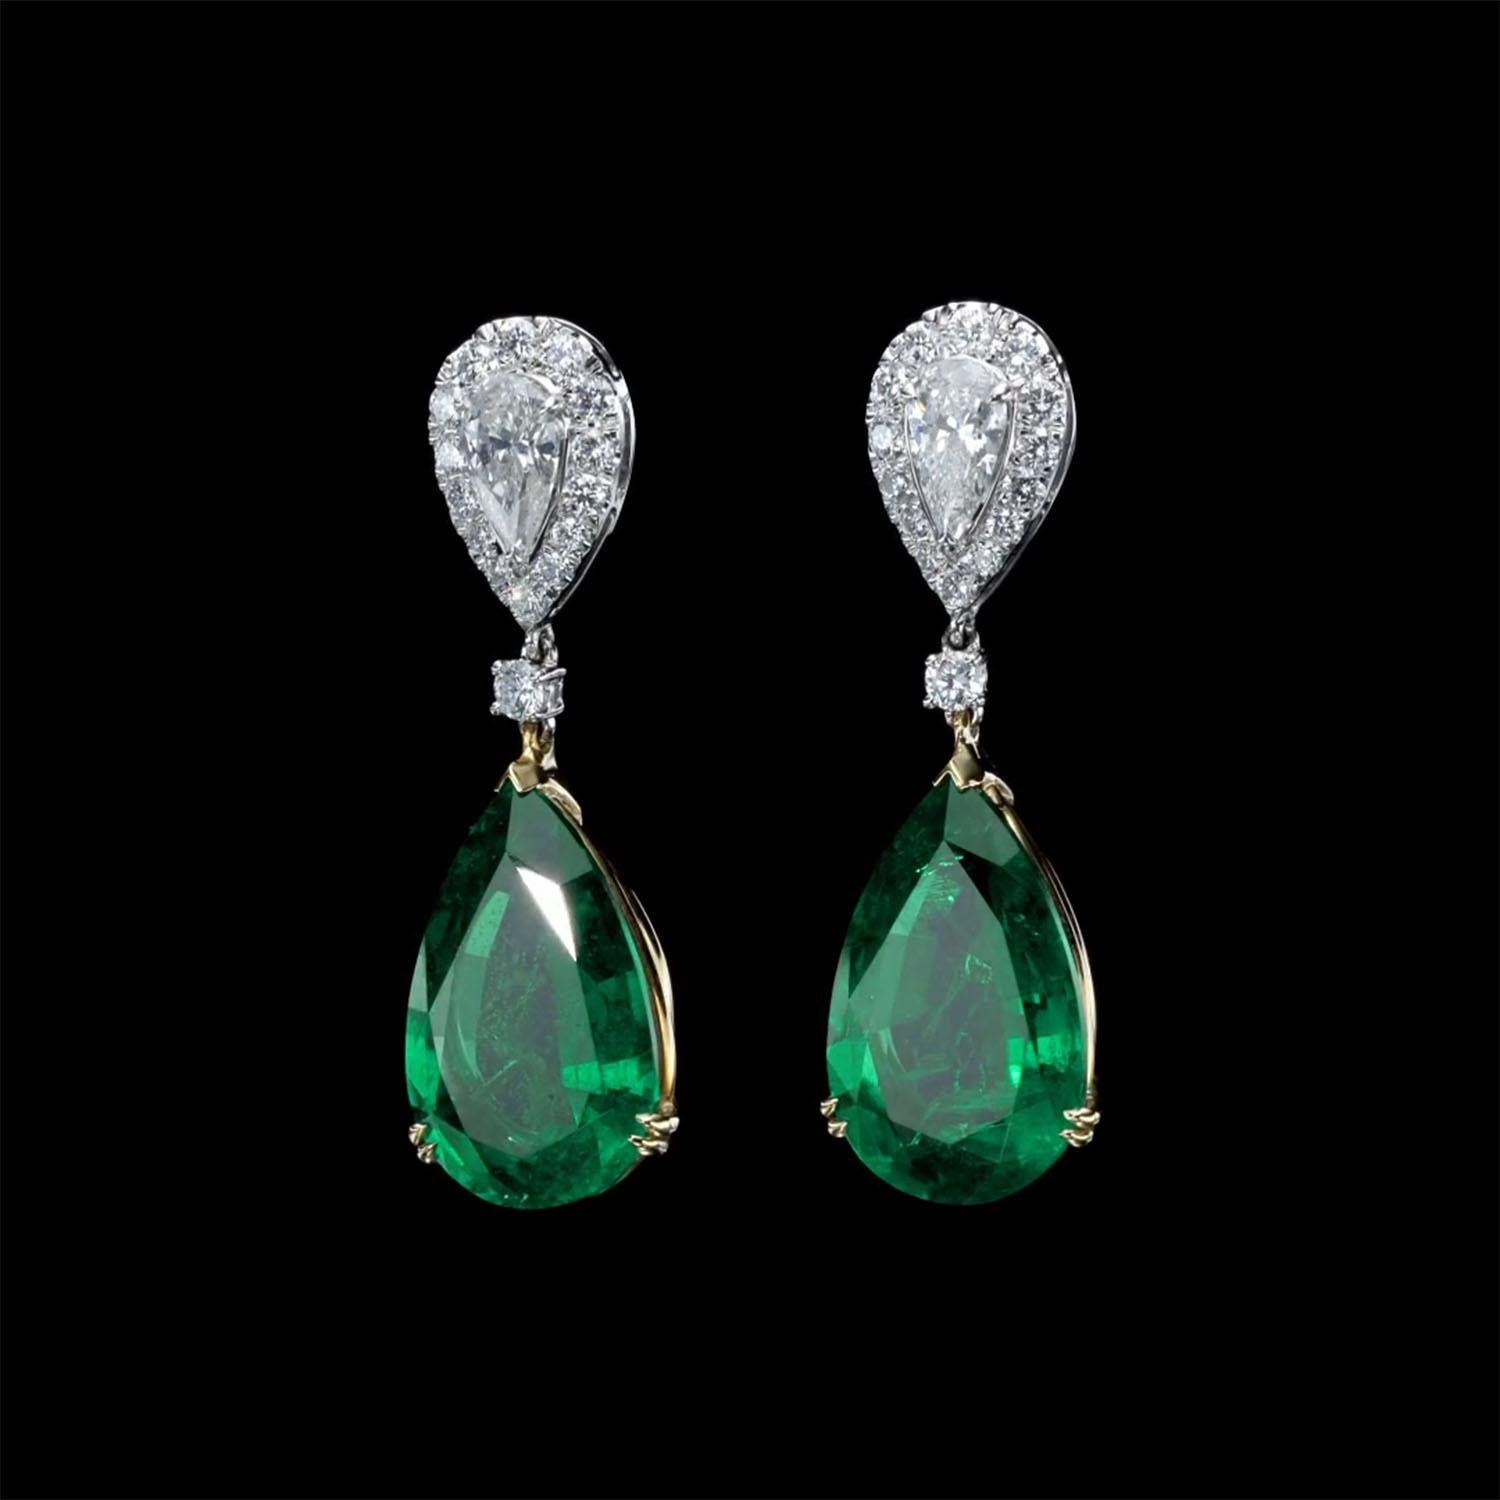 Introducing our exquisite Green Emerald and Diamond Earrings, a testament to exceptional craftsmanship and unparalleled beauty. These remarkable earrings feature a pair of pear-shaped diamonds, each weighing 0.49 carats, adorned with a scintillating